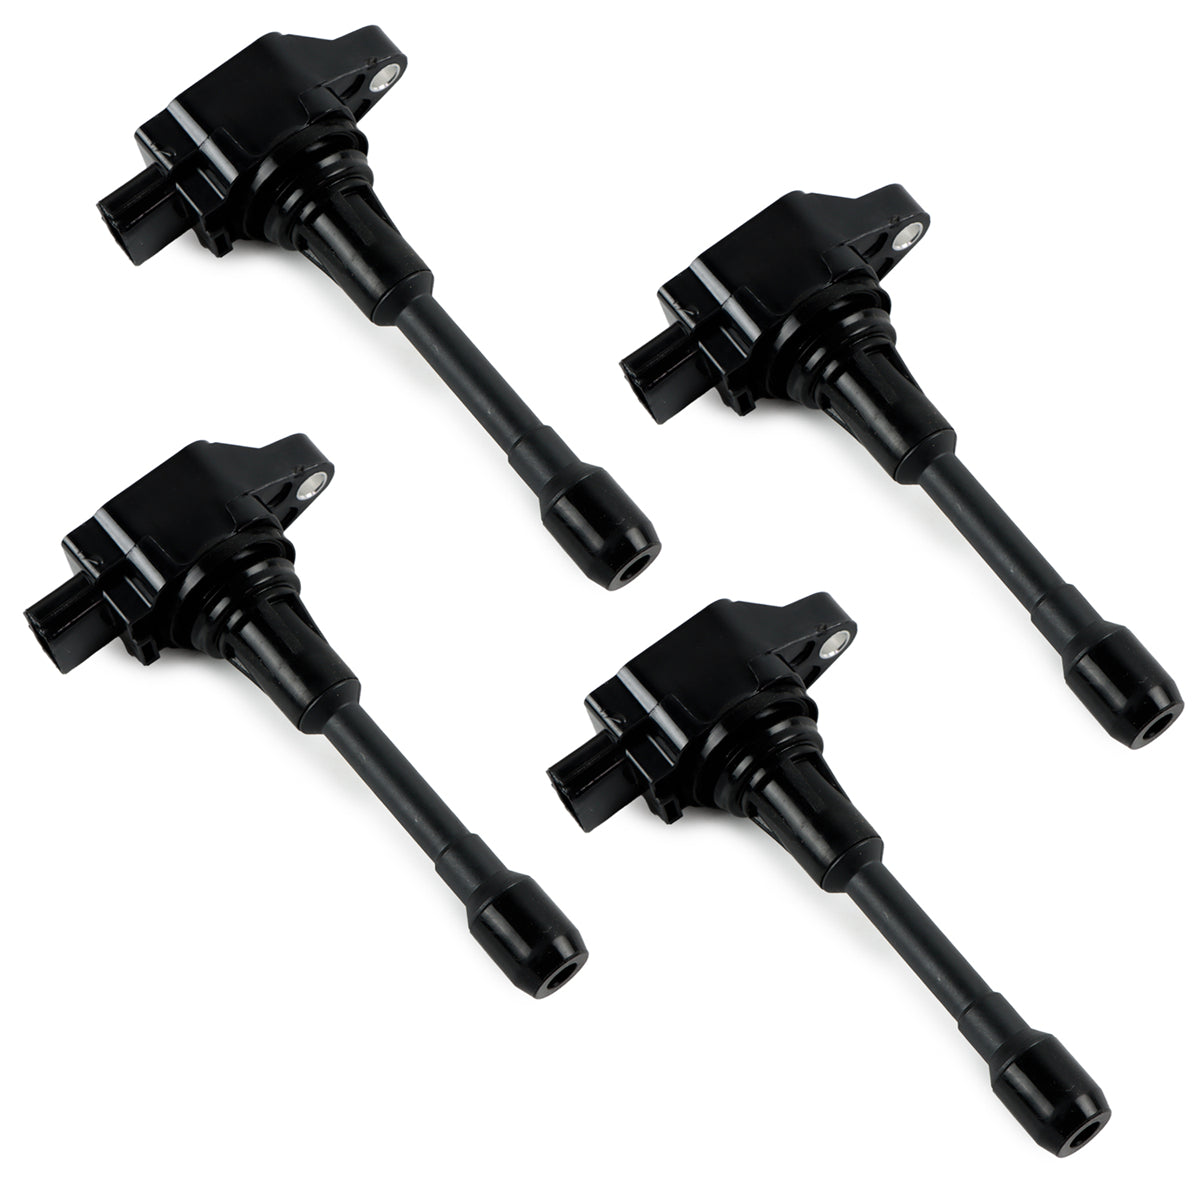 Daysyore® 4pcs Ignition Coils for Nissan Altima Sentra Rogue Cube 2.5L Infiniti FX50 UF549